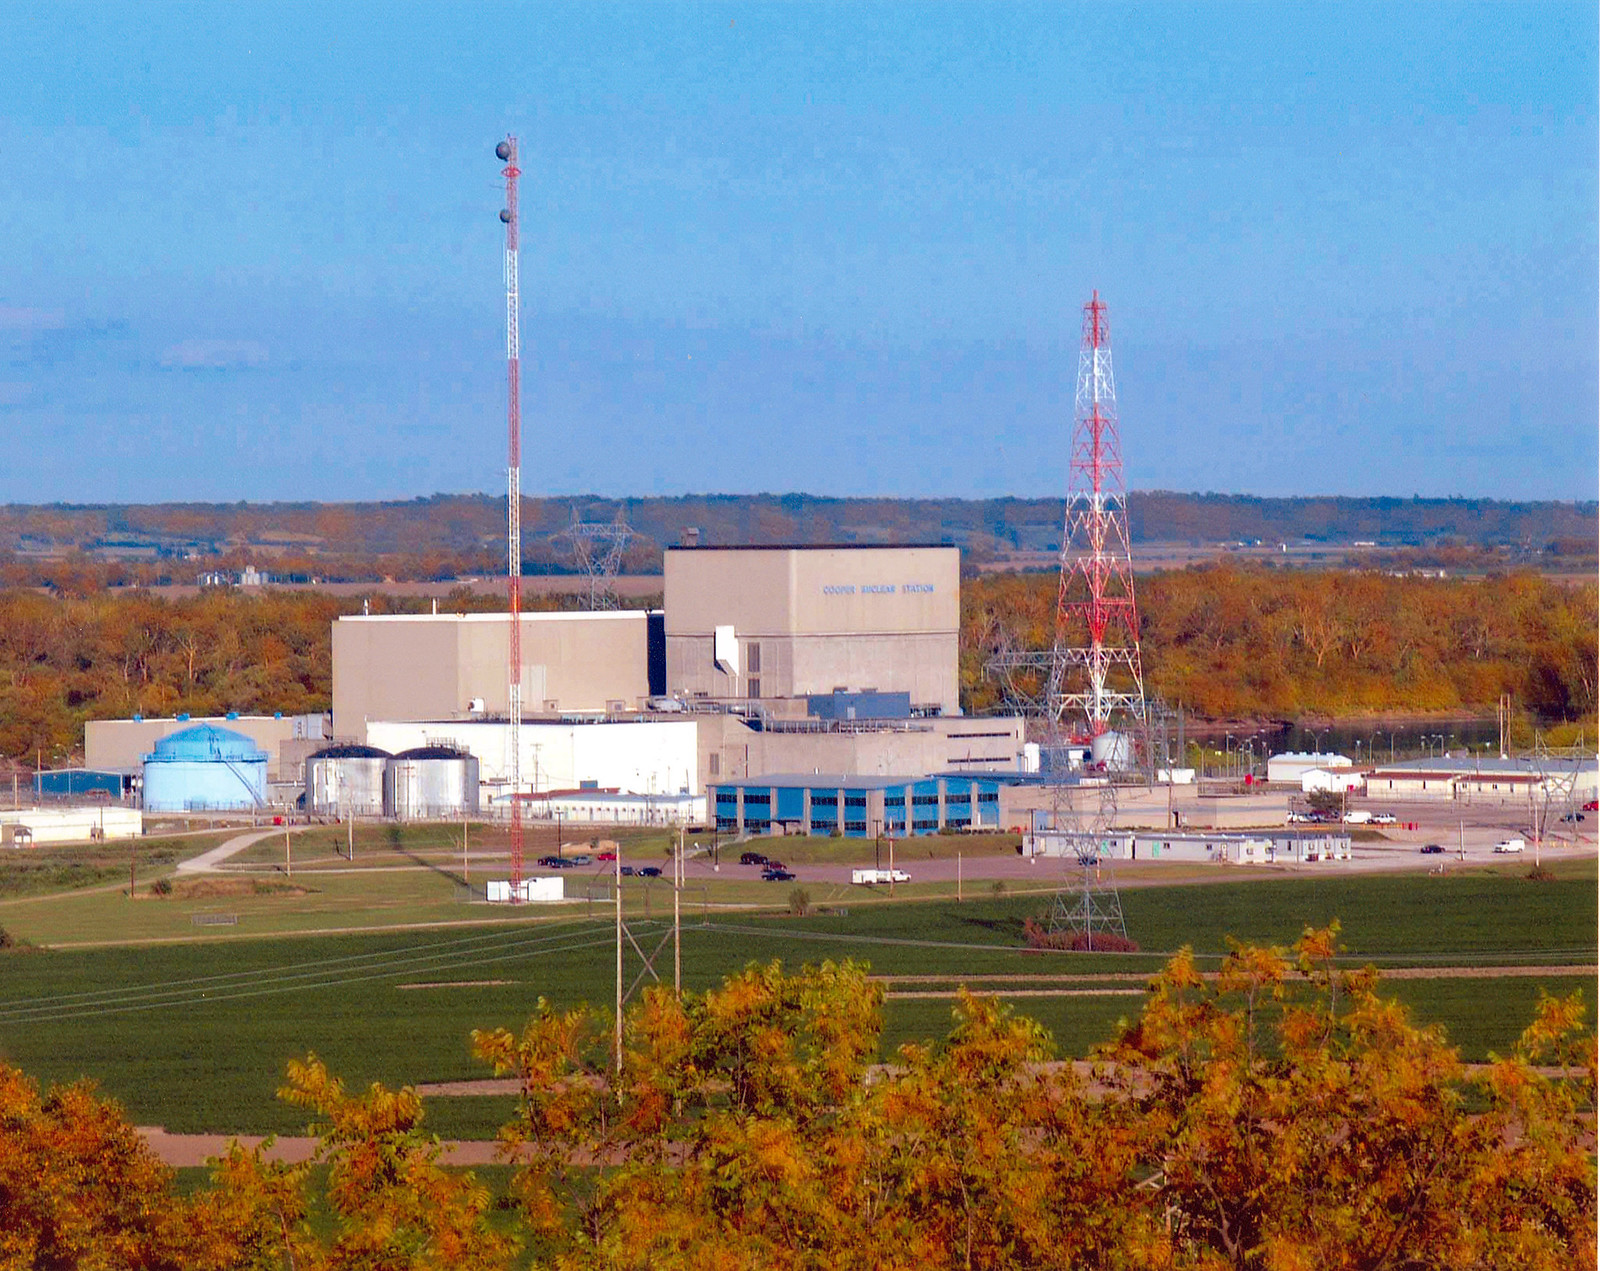 Photograph of Cooper Nuclear Station in Nebraska. The photos shows three squarish brick building of different heights arranged in a stair-step fashion. Around the buildings are tanks, other buildings, and antenna towers. The landscape around is forested, with trees in autumn colors.